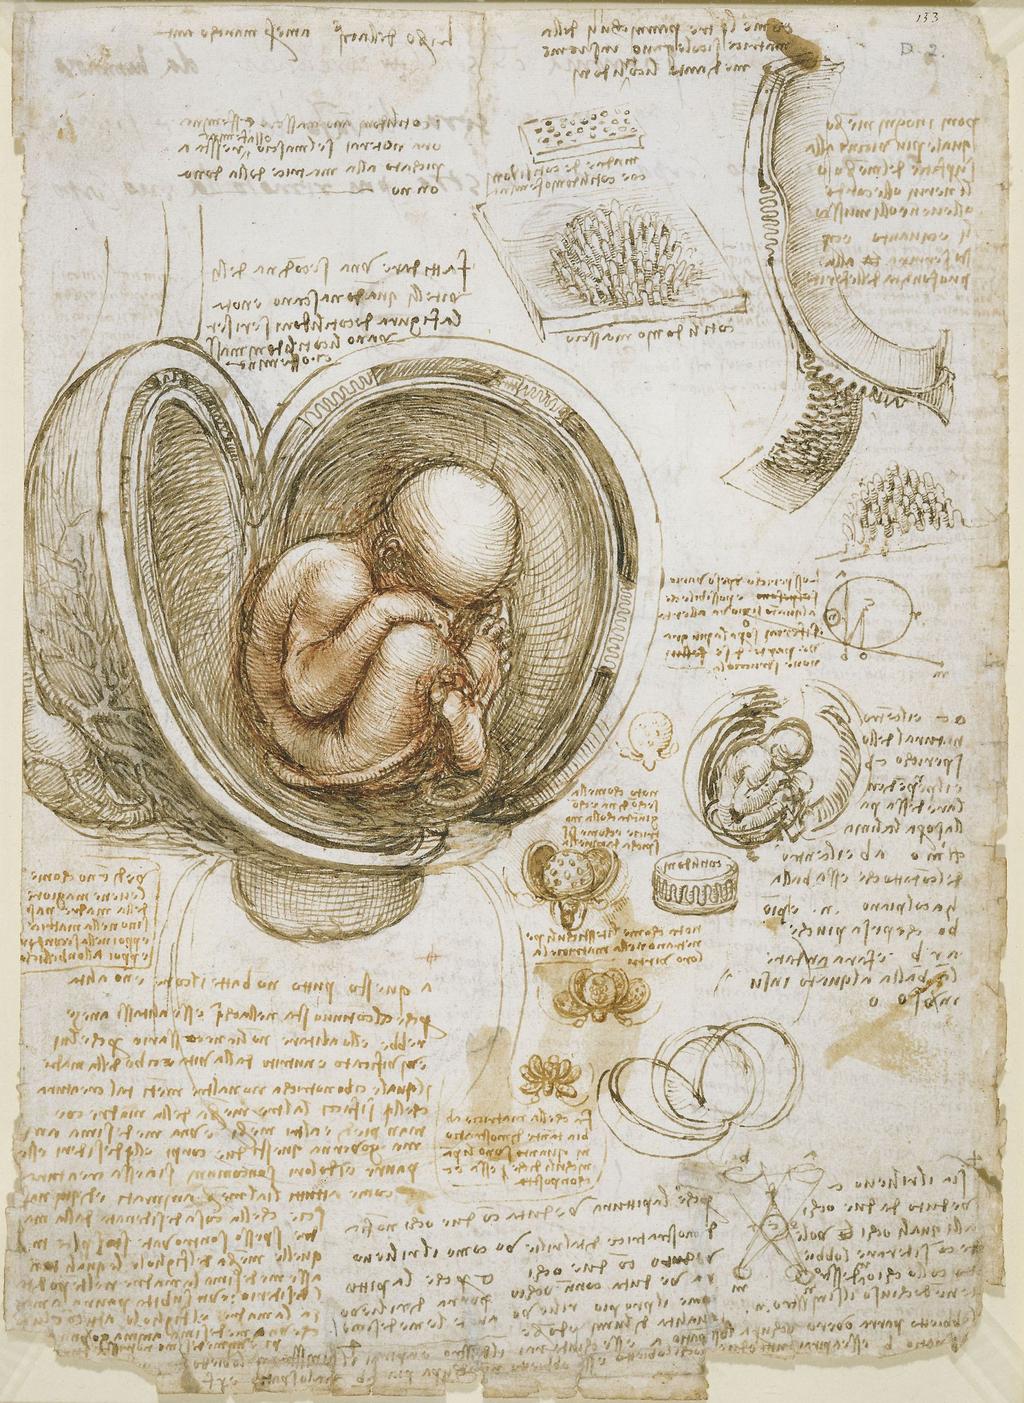 Science Pages Leonardo Da Vinci Lived from 1442-1519 in Tuscan town Vinci He was a Renaissance Man Painter Observations Sculptor Architect Inventor Military engineer